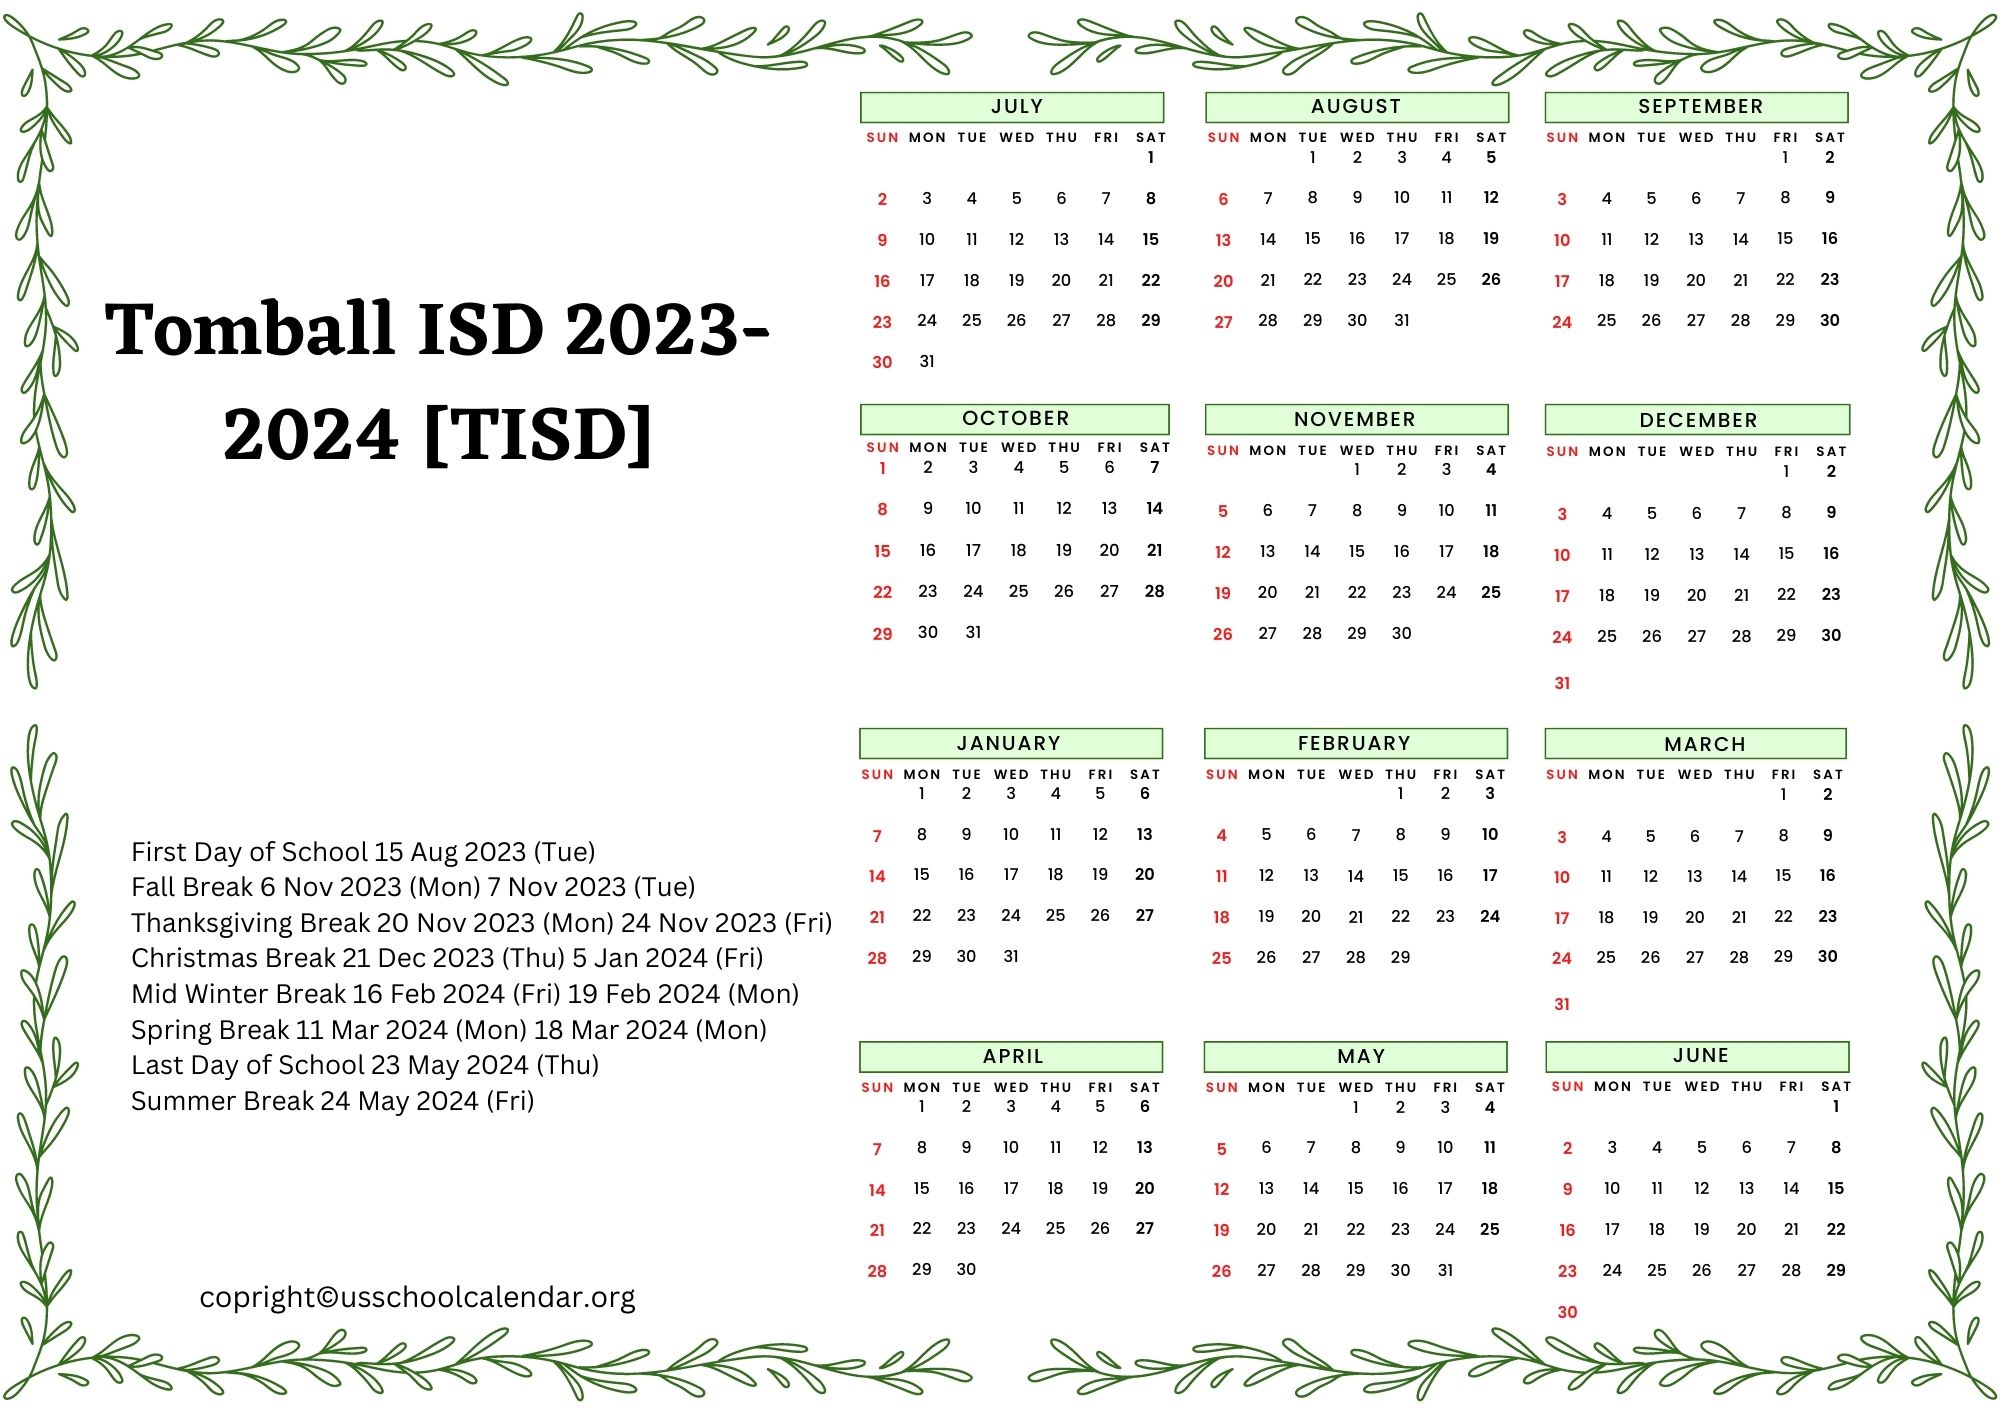 Tomball ISD Calendar with Holidays 2023 2024 TISD